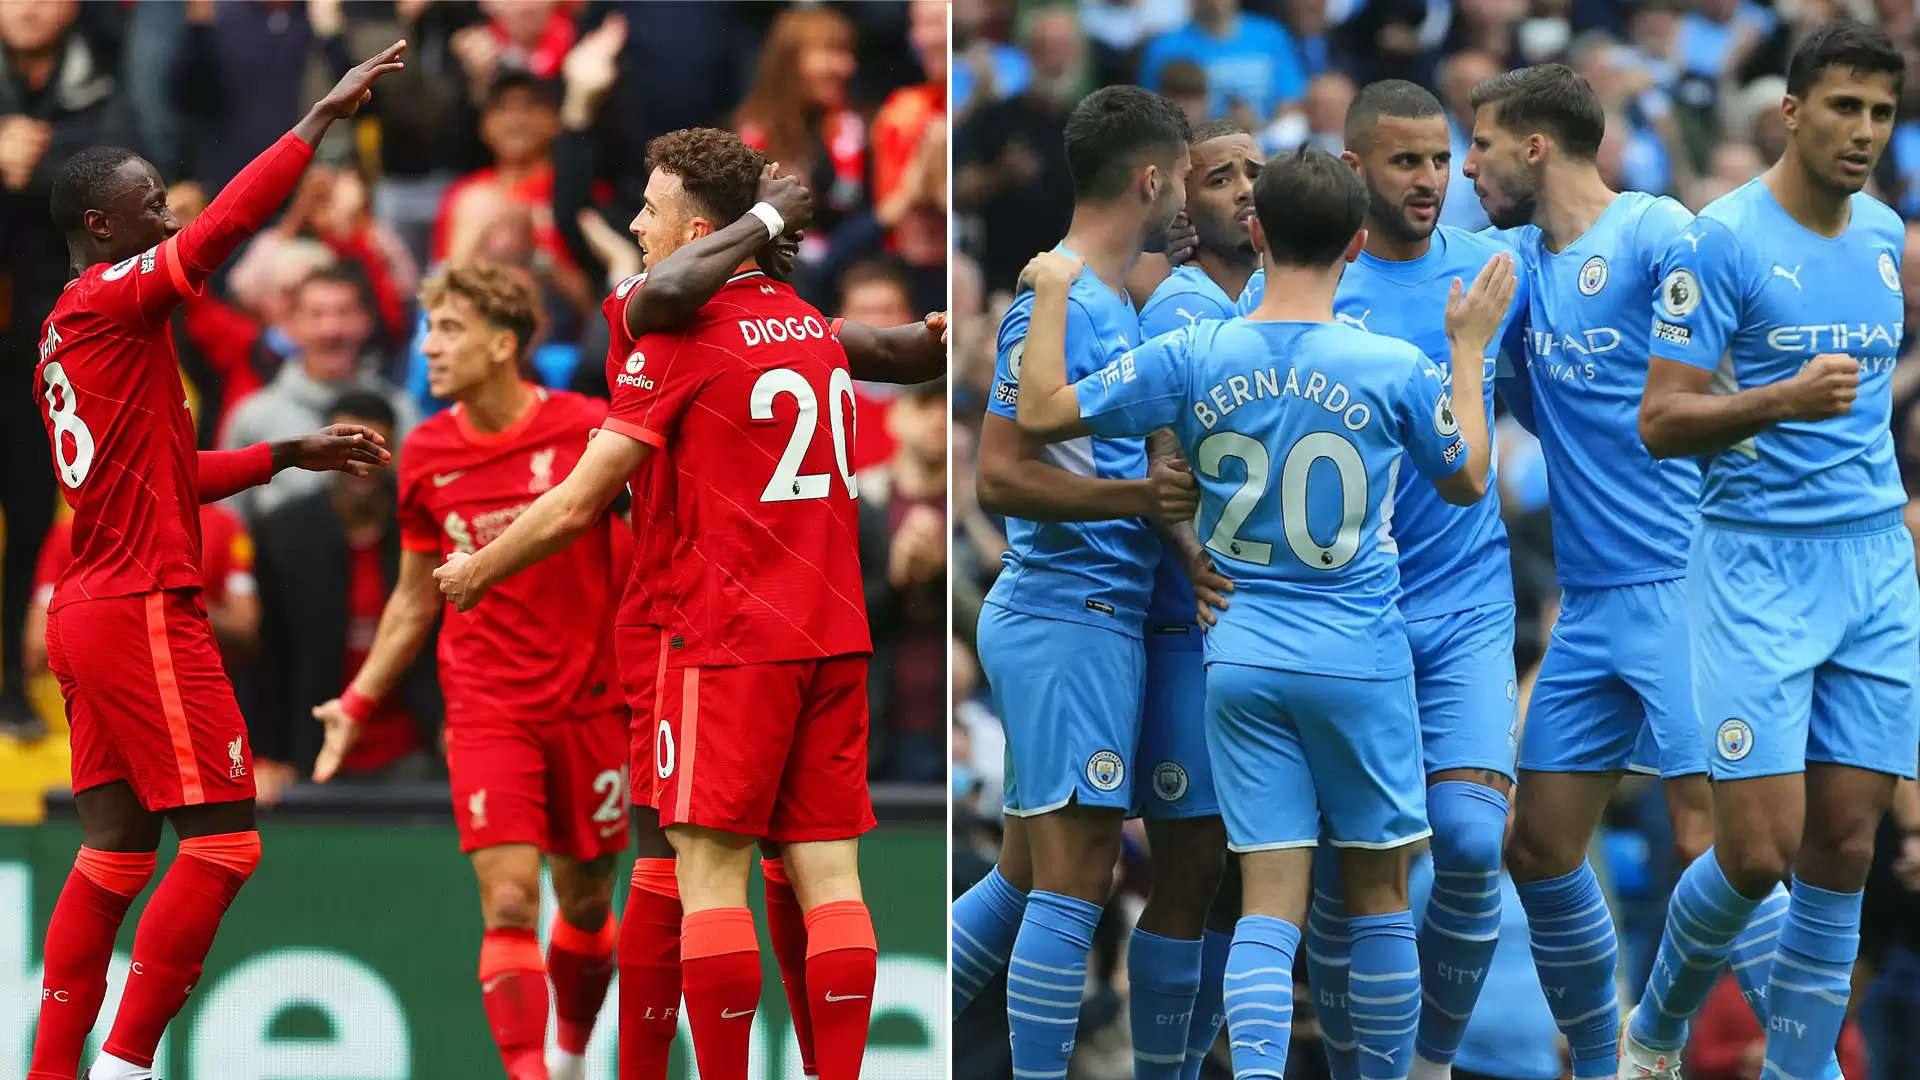 MAN CITY AND LIVERPOOL